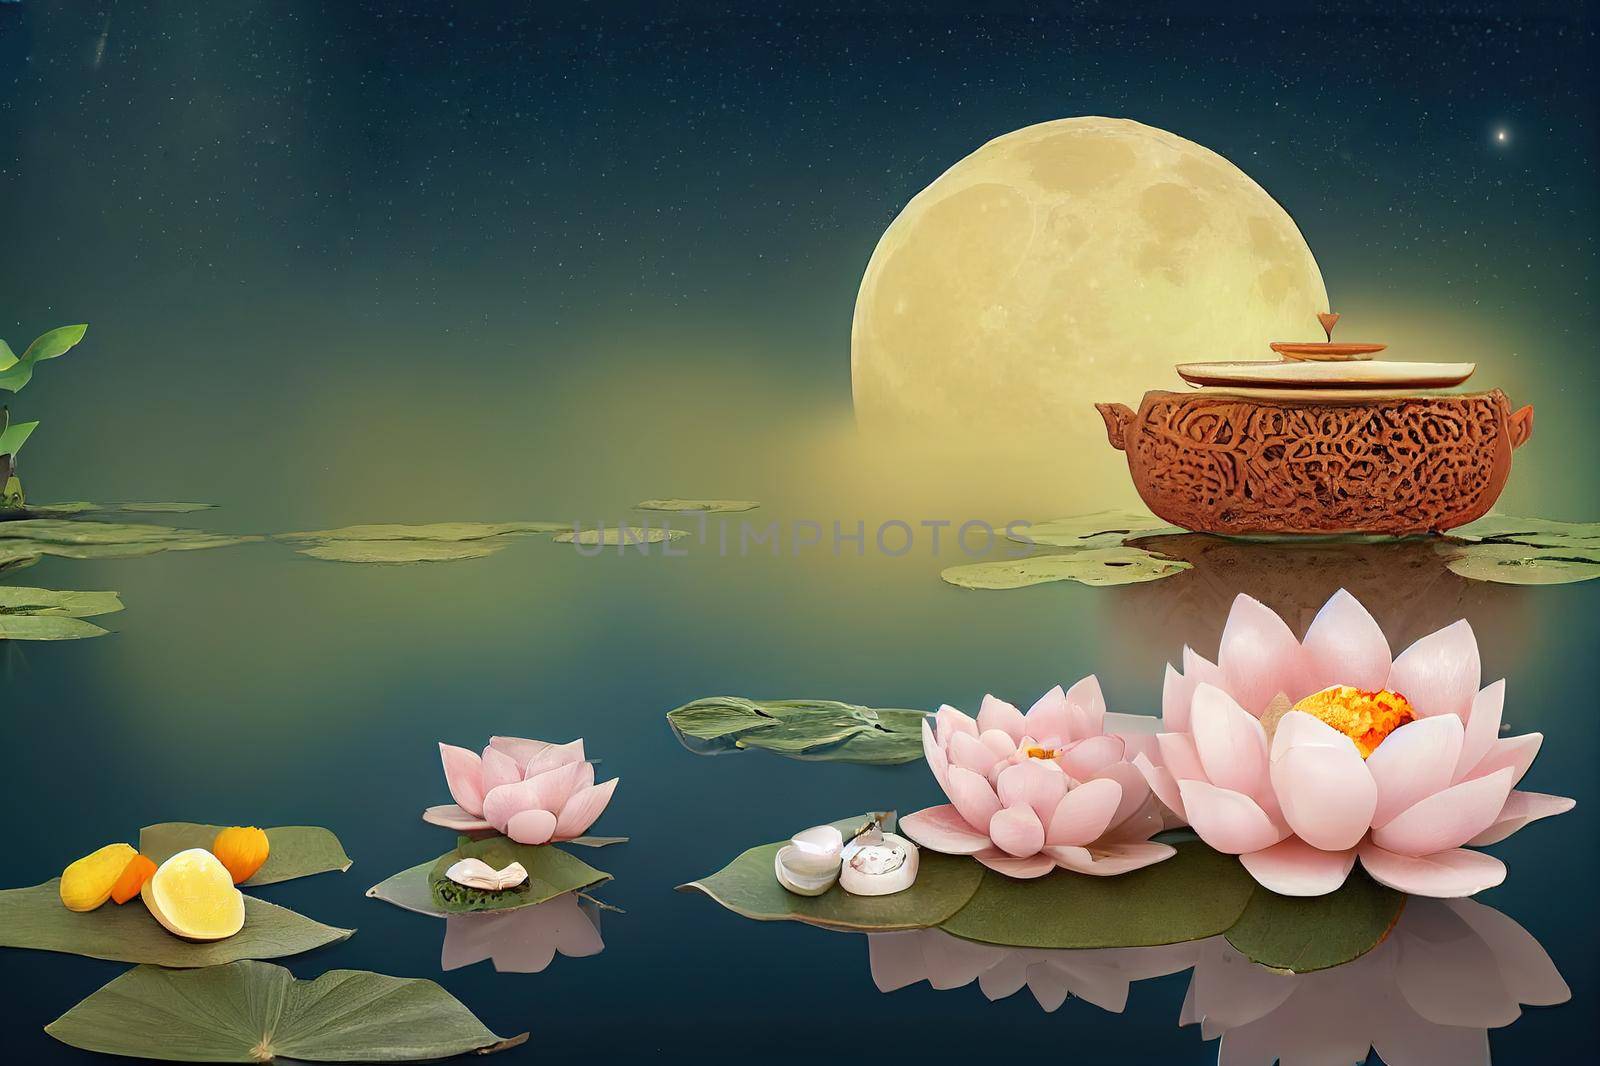 3D Illustration of jade rabbits eating mooncake and pomelo on big mooncake upon lotus leaf on lake with giant tea pot aside in front of full moon. Translation August fifteenth. Mid Autumn Festival